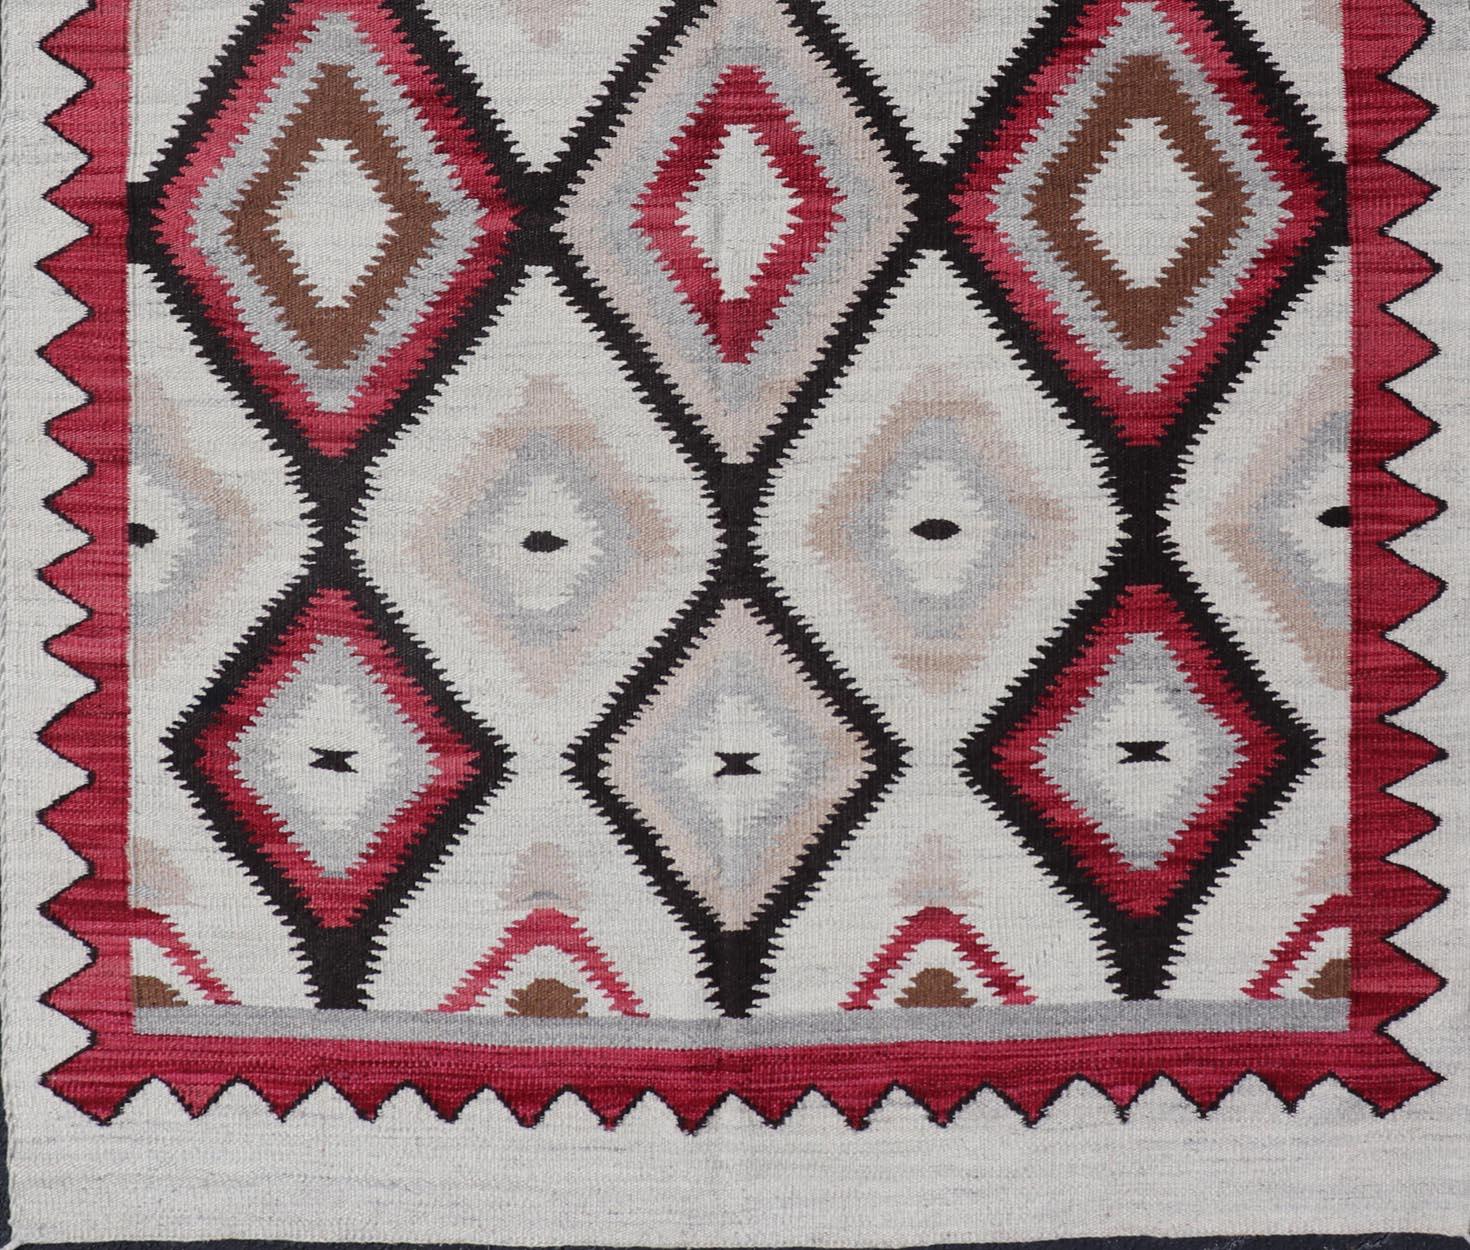 American Navajo Design Rug with Latticework Tribal Design in Red, Black and Gray For Sale 2